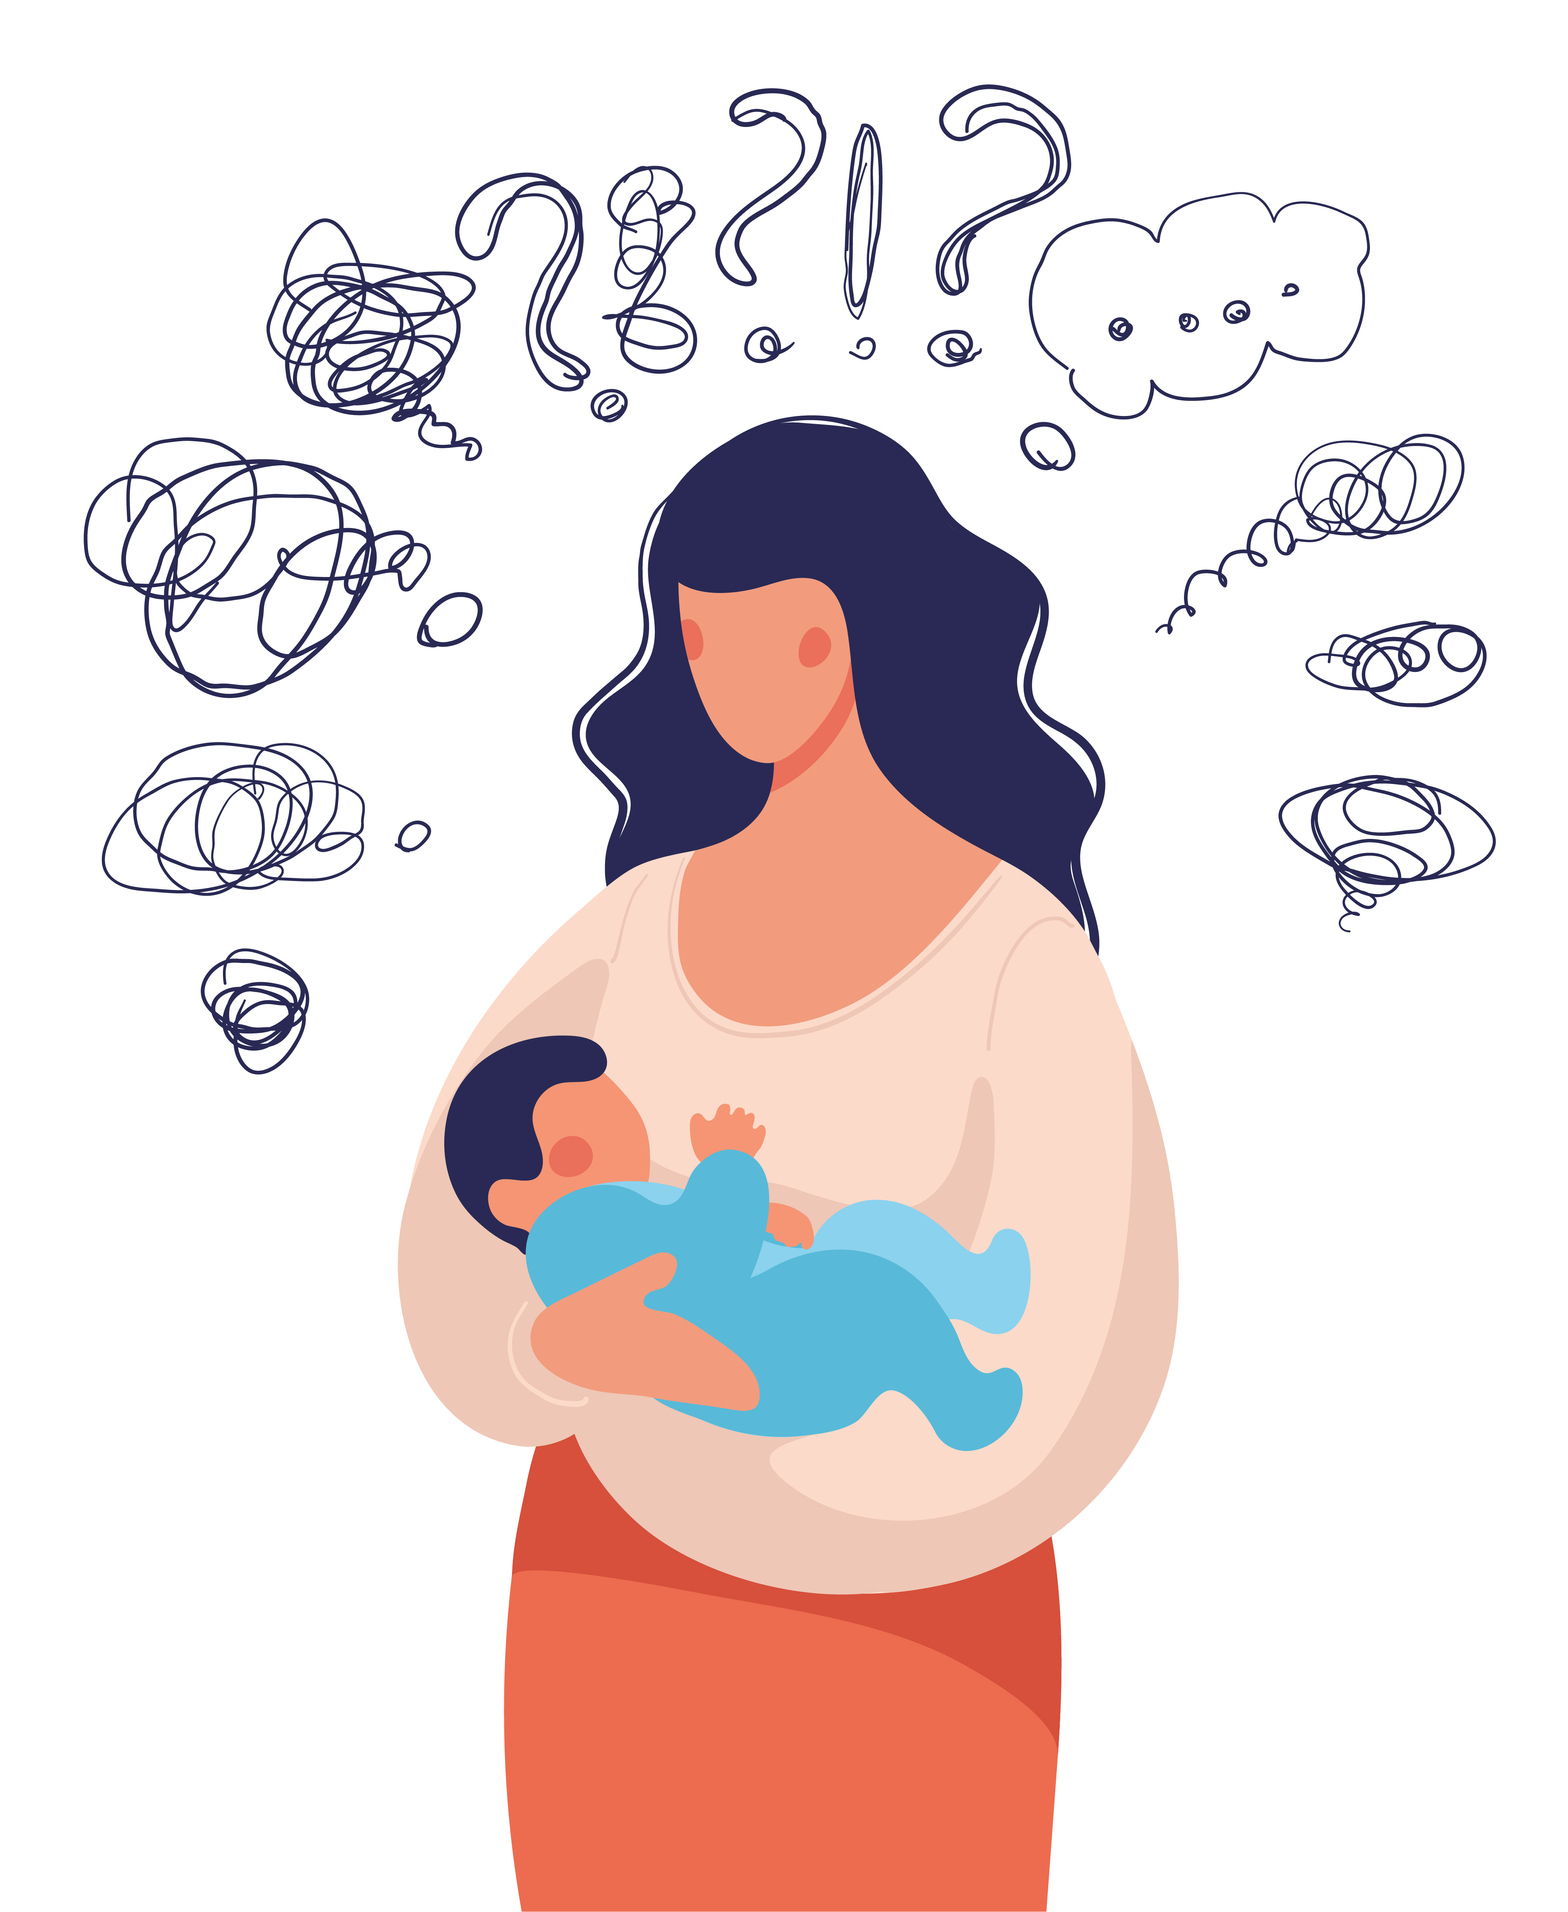 A woman with a child in her arms asks herself many questions. With postpartum OCD therapy, you can feel better. Contact us today to learn more about ERP therapy in American Fork, UT.